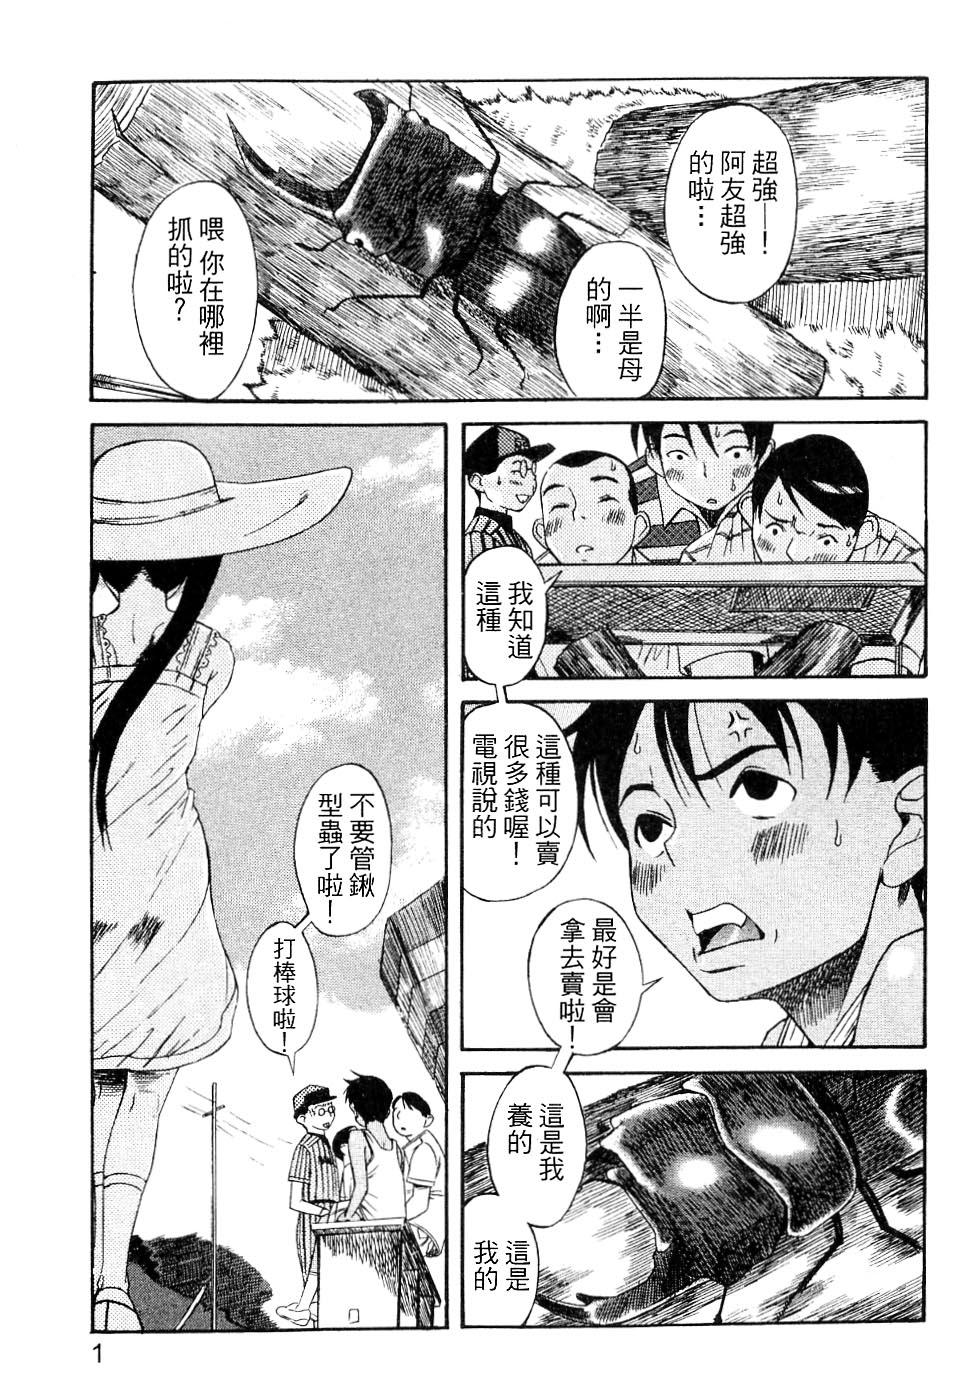 Holes Kuwagata - The Stag Beetle | 鍬形蟲 Lesbians - Page 2